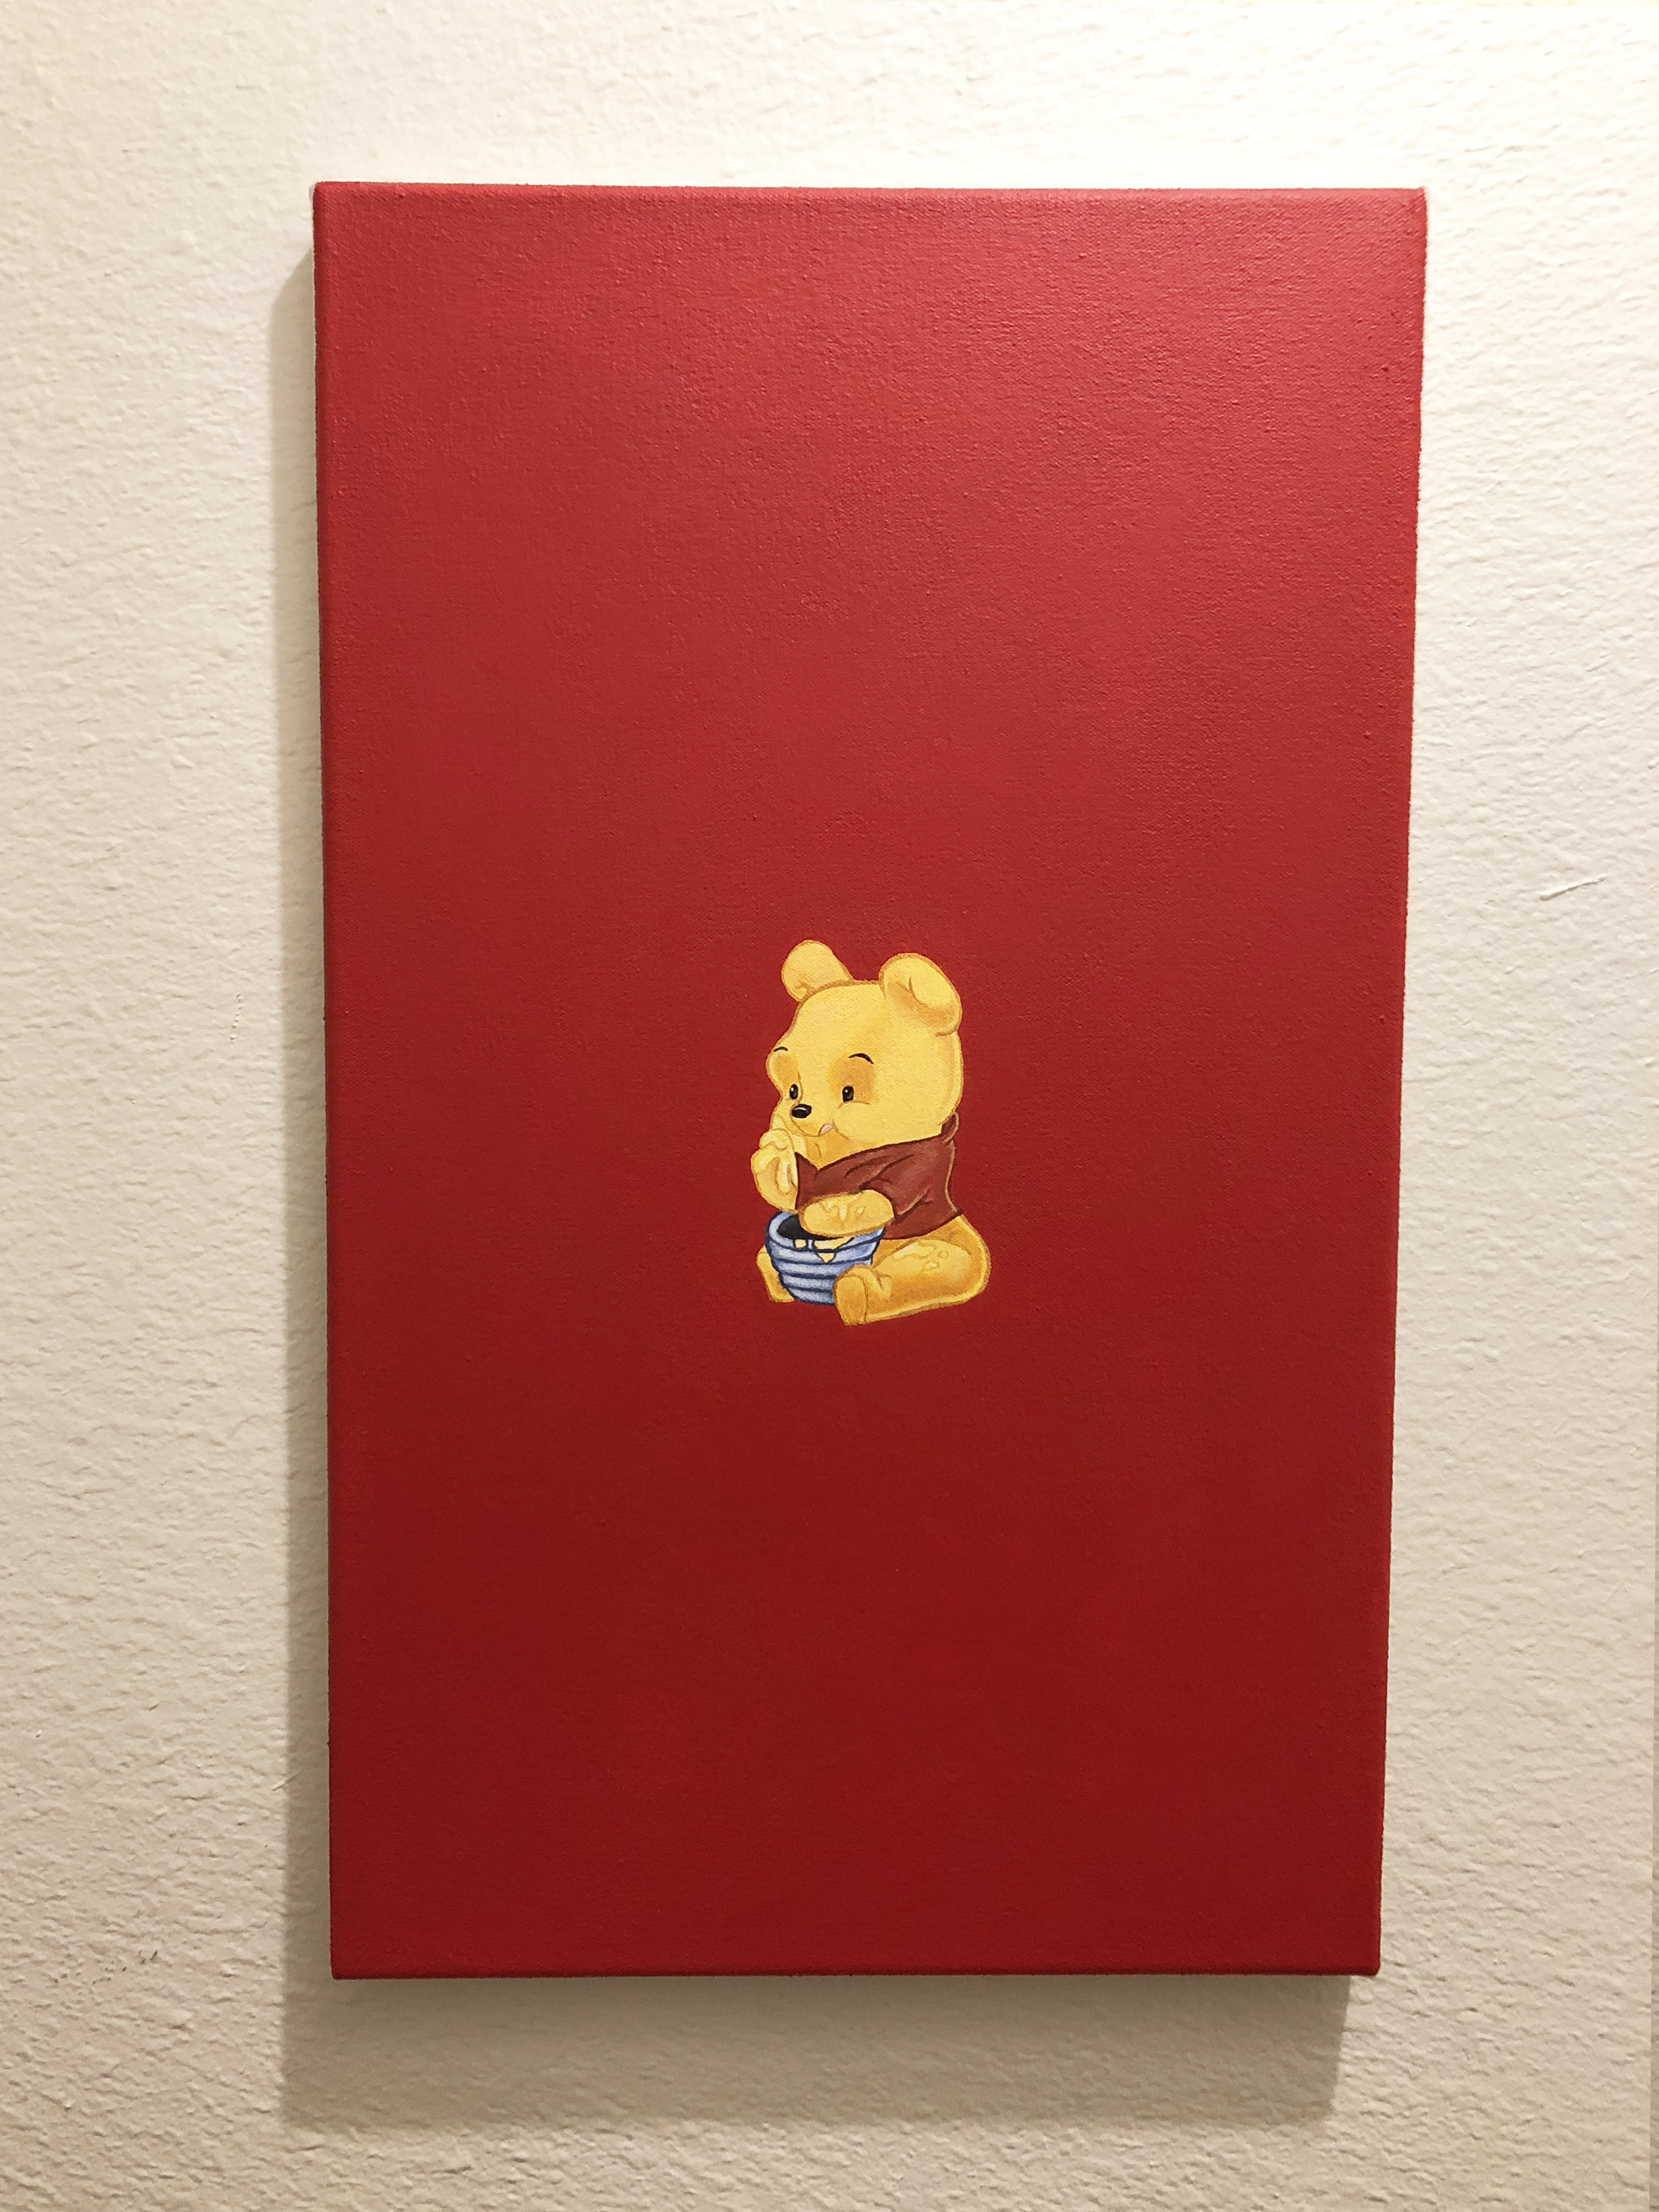 Painting of winnie the pooh eating honey out of a pot on a red background hung on a white wall